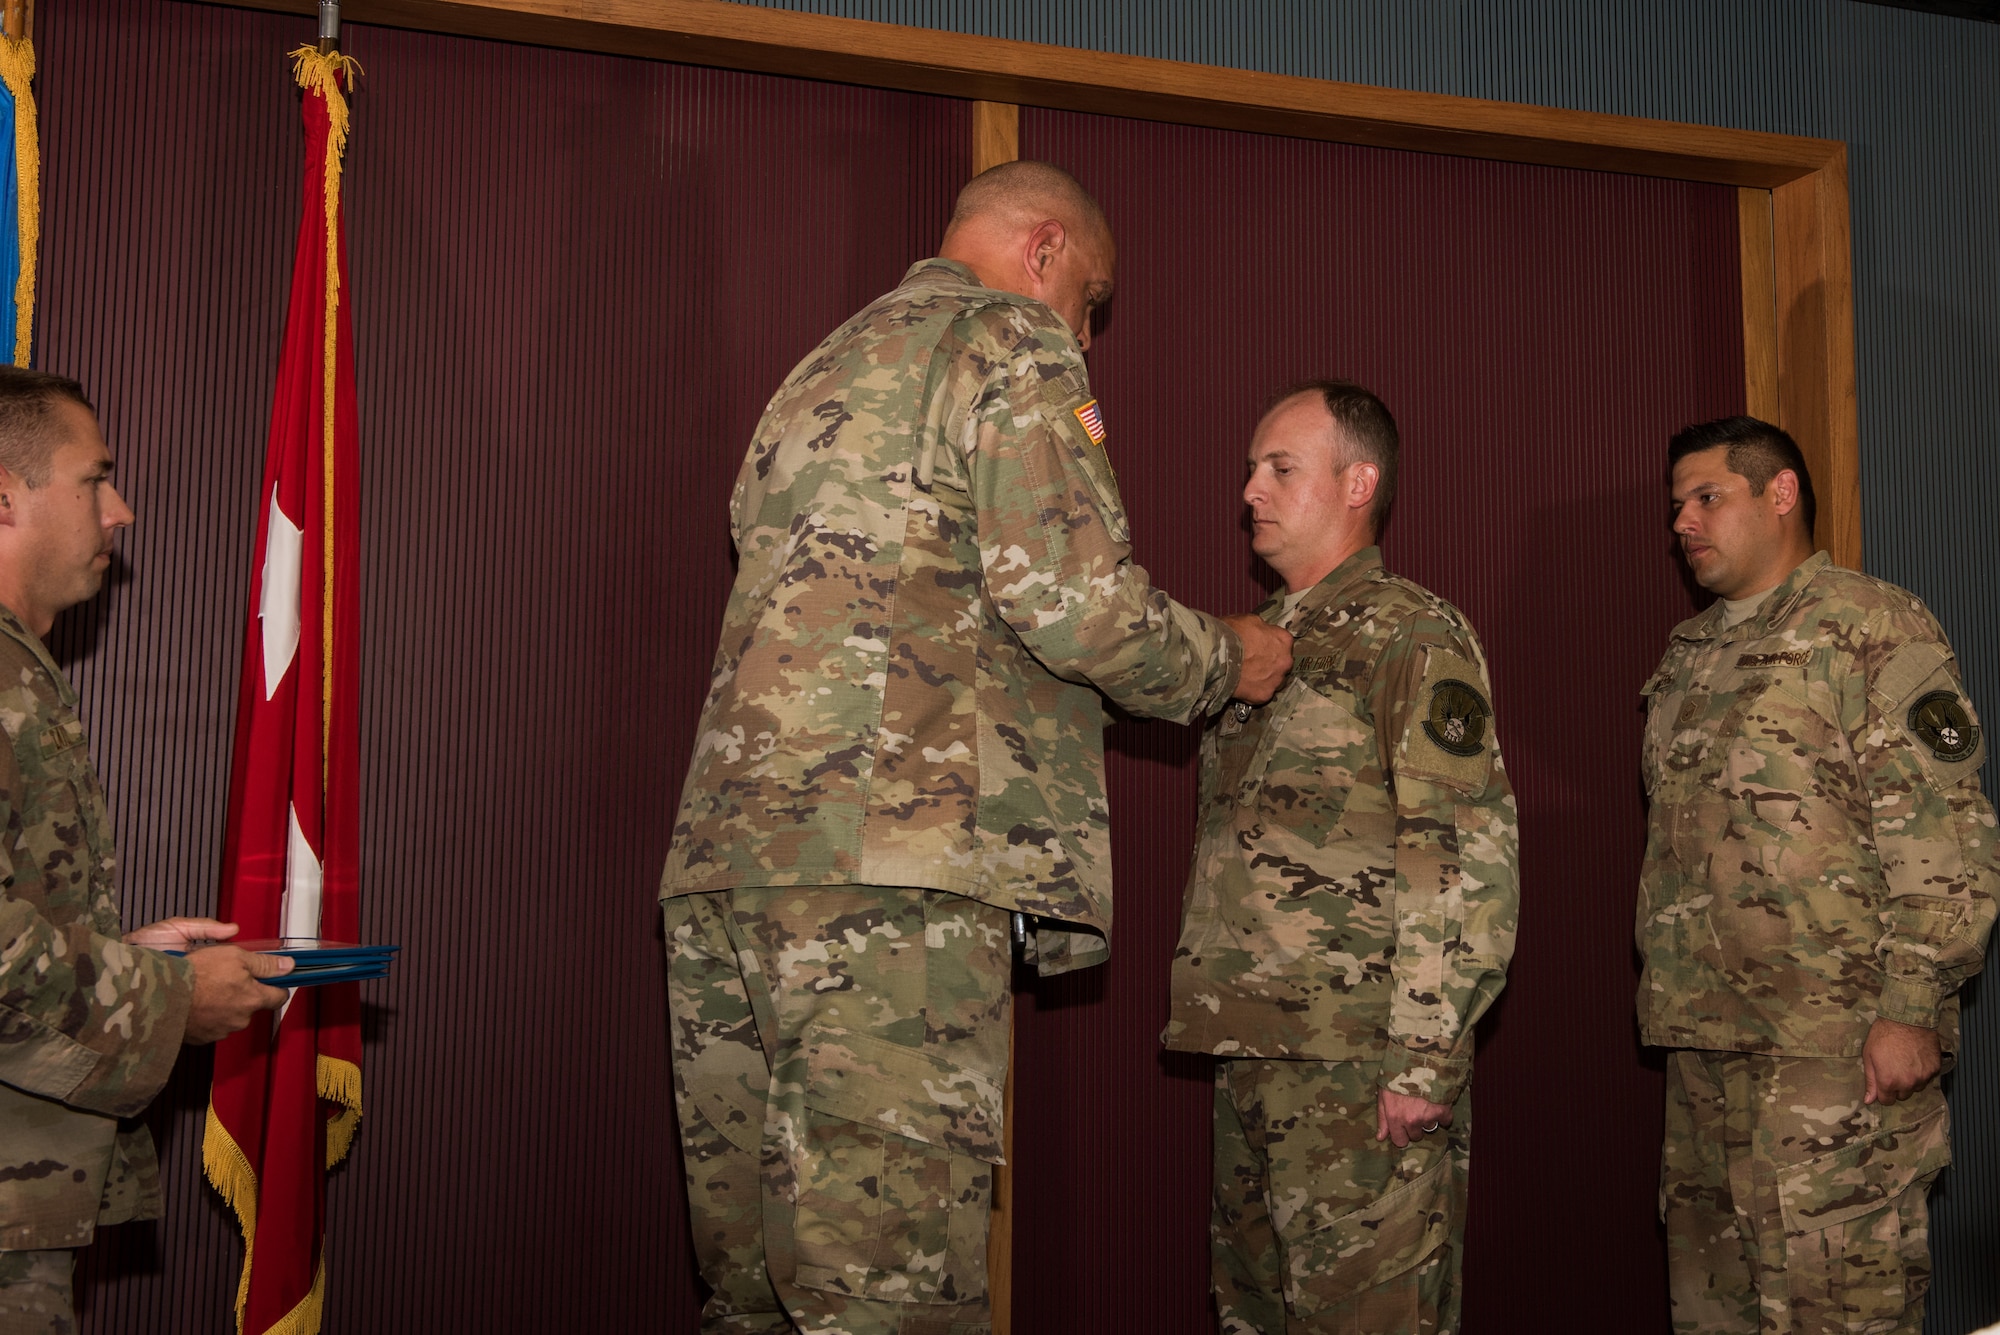 Major General Michael Thompson, Adjutant General for Oklahoma, pins a medal on Master Sgt. Casey Ray, 285th Special Operations Intelligence Squadron (SOIS) intelligence analyst, as Master Sgt. Adam Hinsperger, 285th SOIS intelligence analyst, waits to receive his award during an award ceremony Aug. 4, 2018, at Will Rogers Air National Guard Base, Oklahoma City.